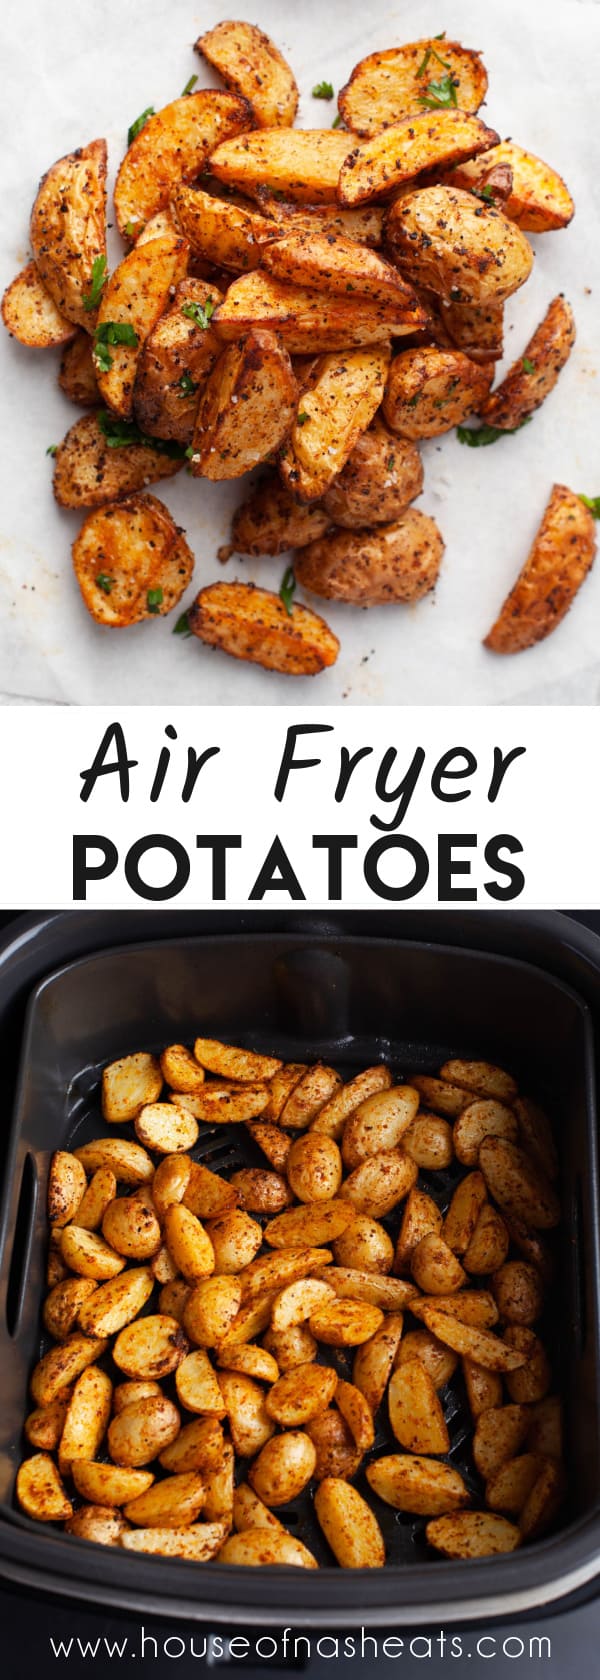 A collage of images of air fryer potatoes with text overlay.